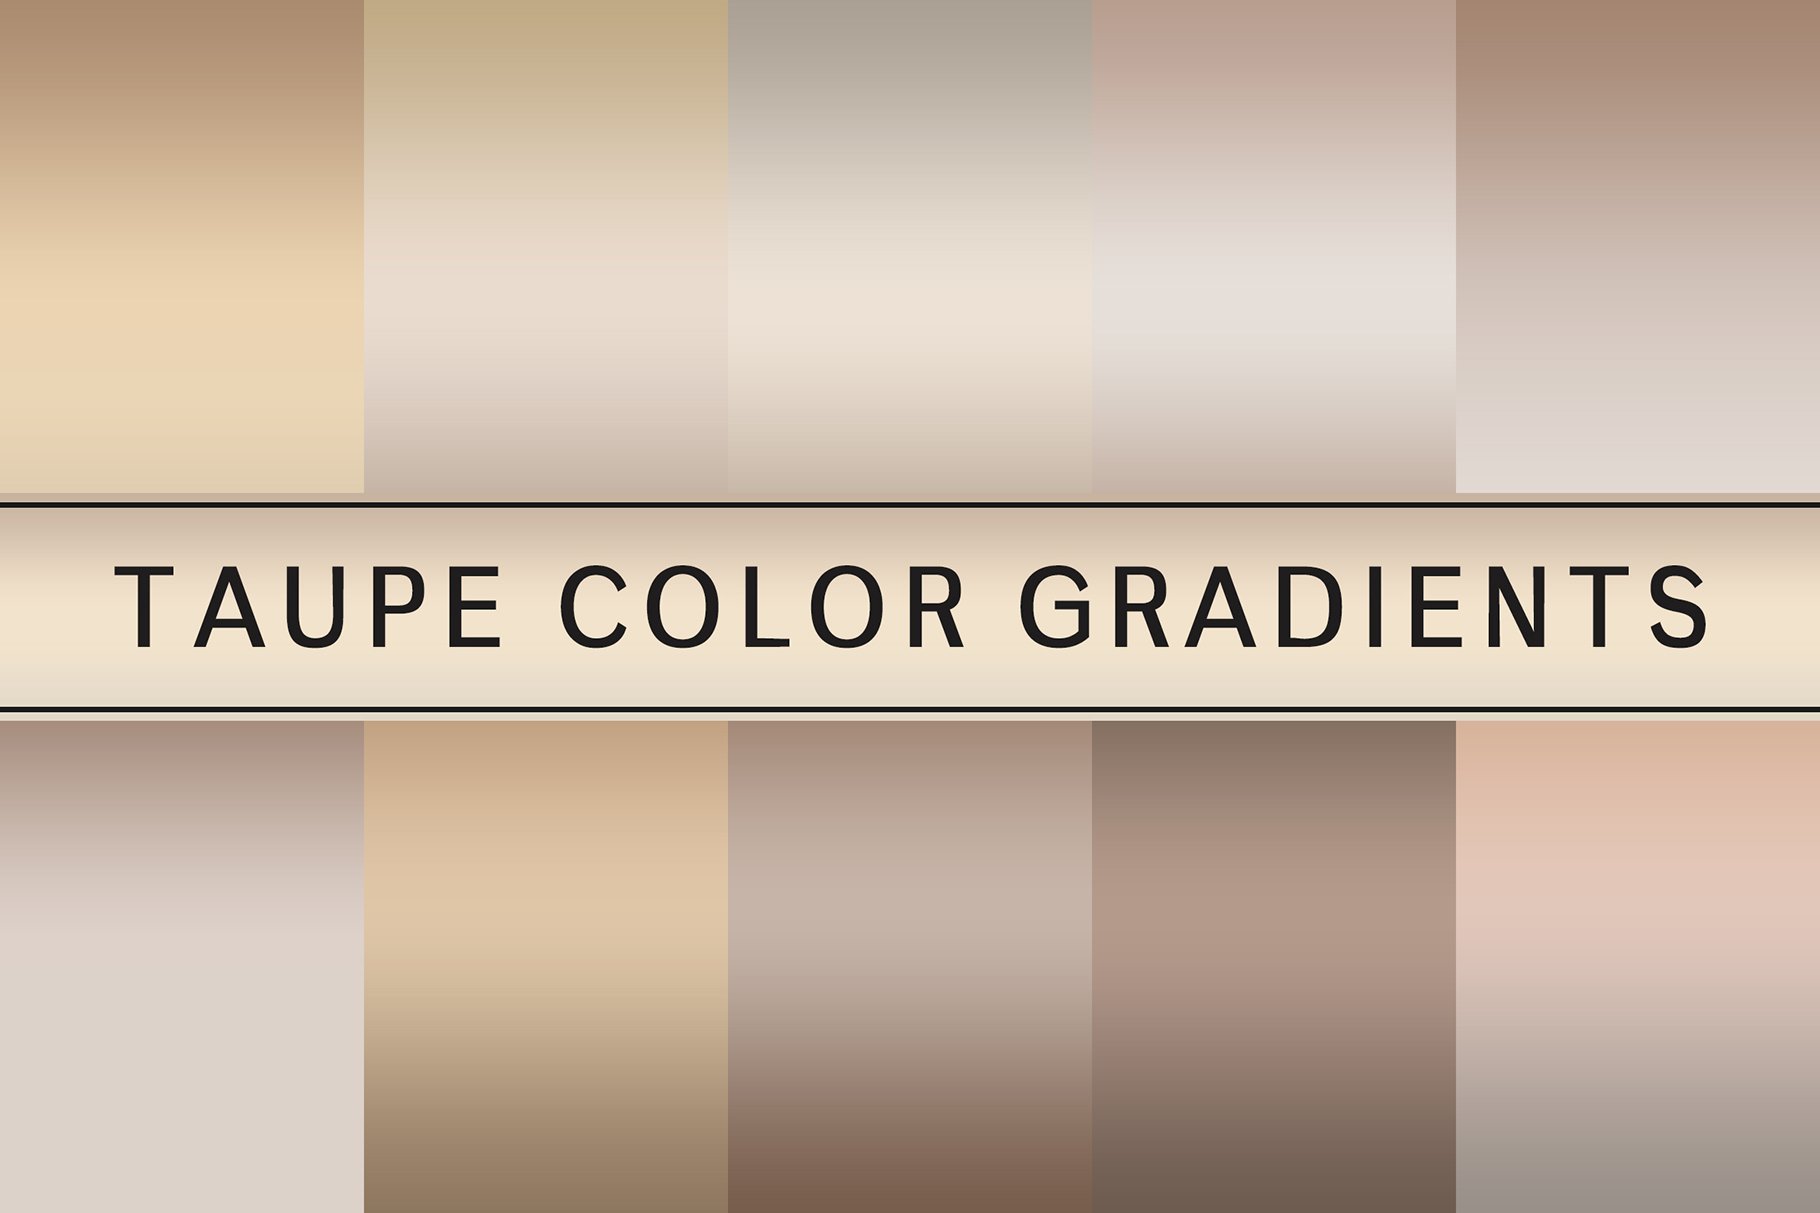 Taupe Color Gradientscover image.